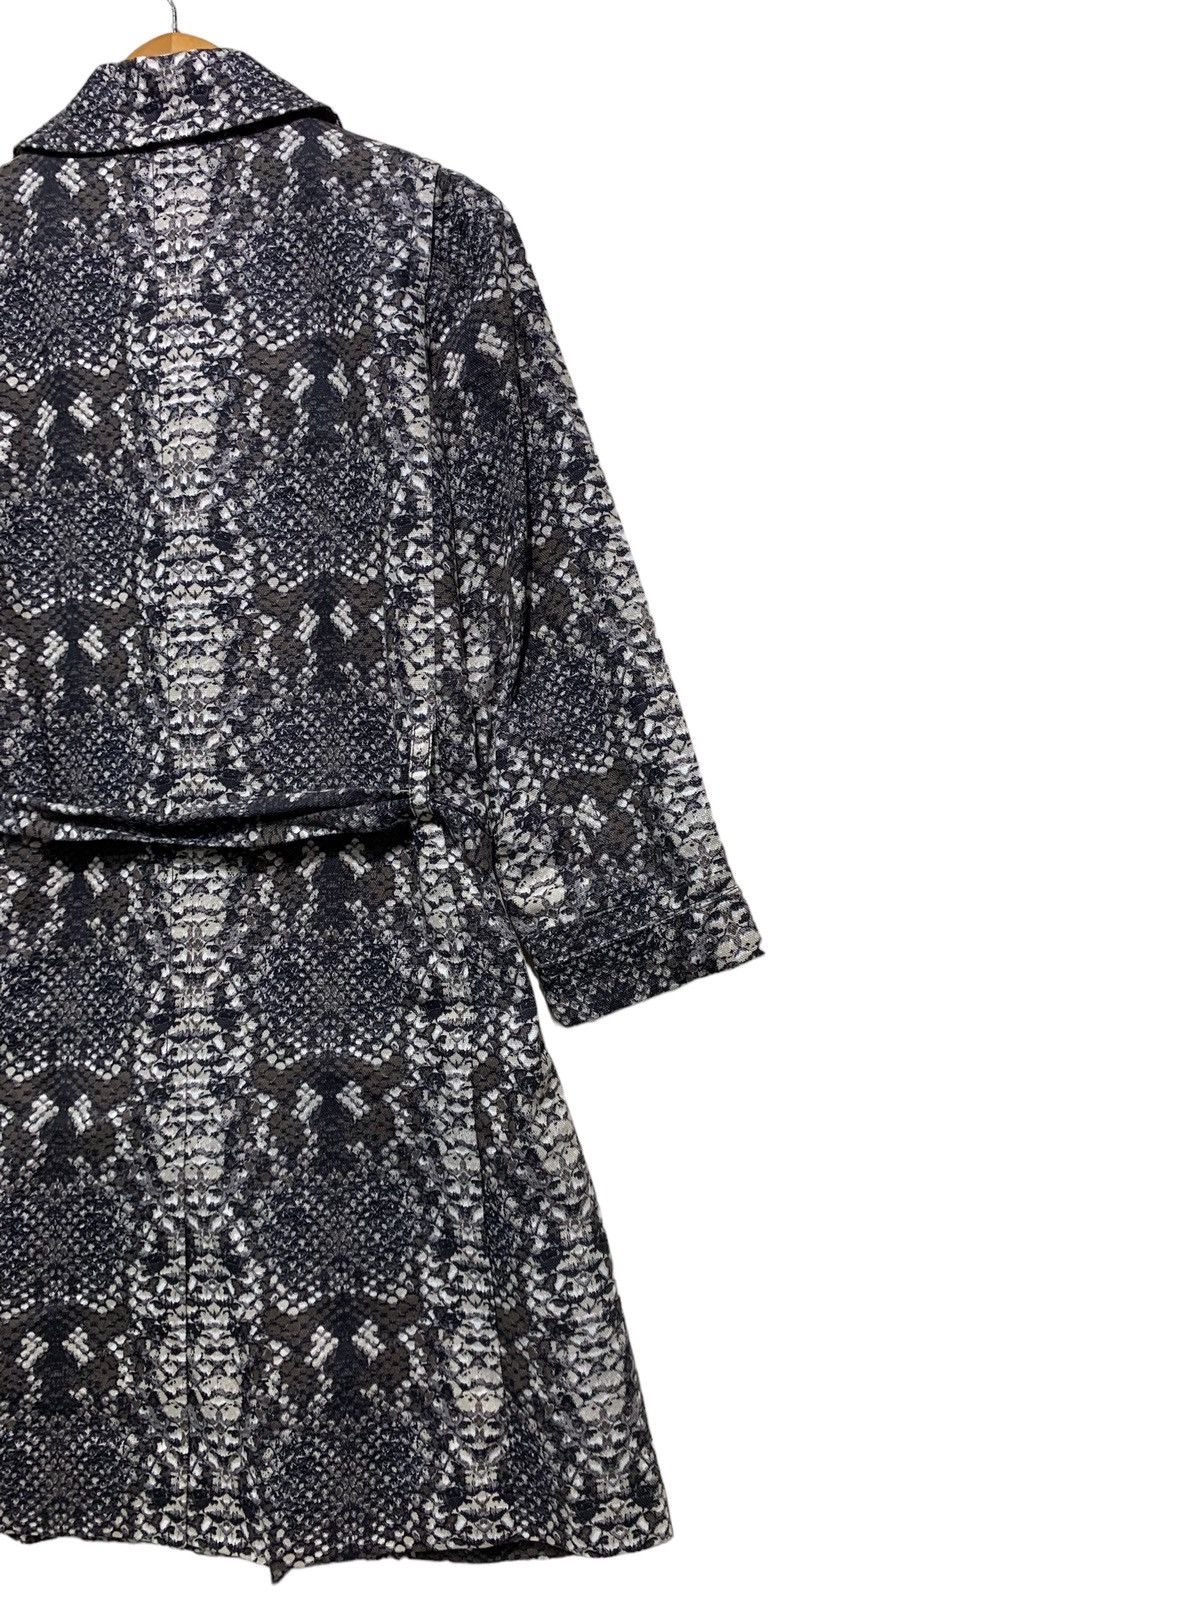 🔥MARC JACOBS SNAKESKIN PRINTED TRENCHCOATS - 7